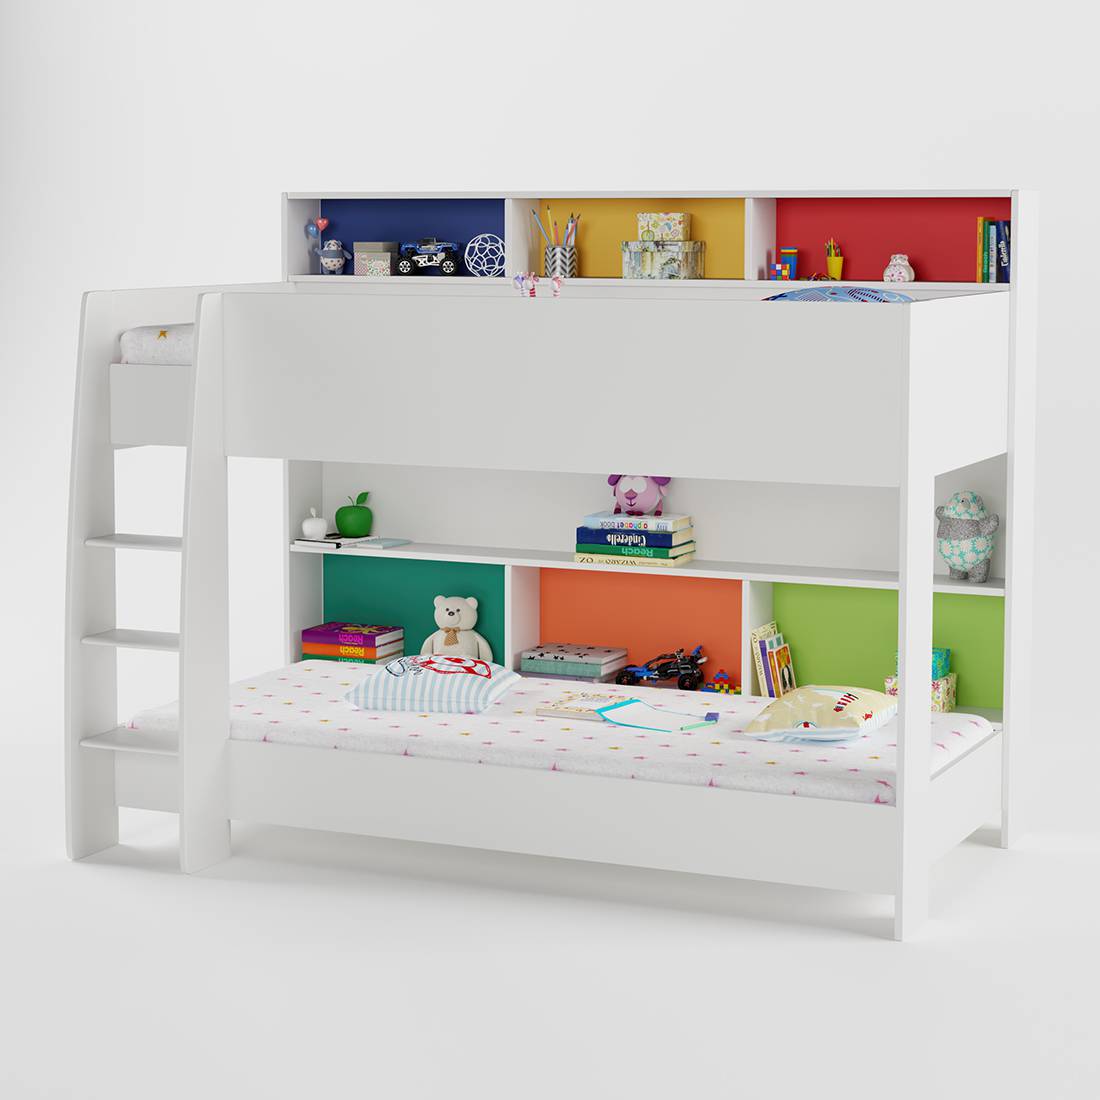 Bunk Bed Beds In India, Bunk Bed India